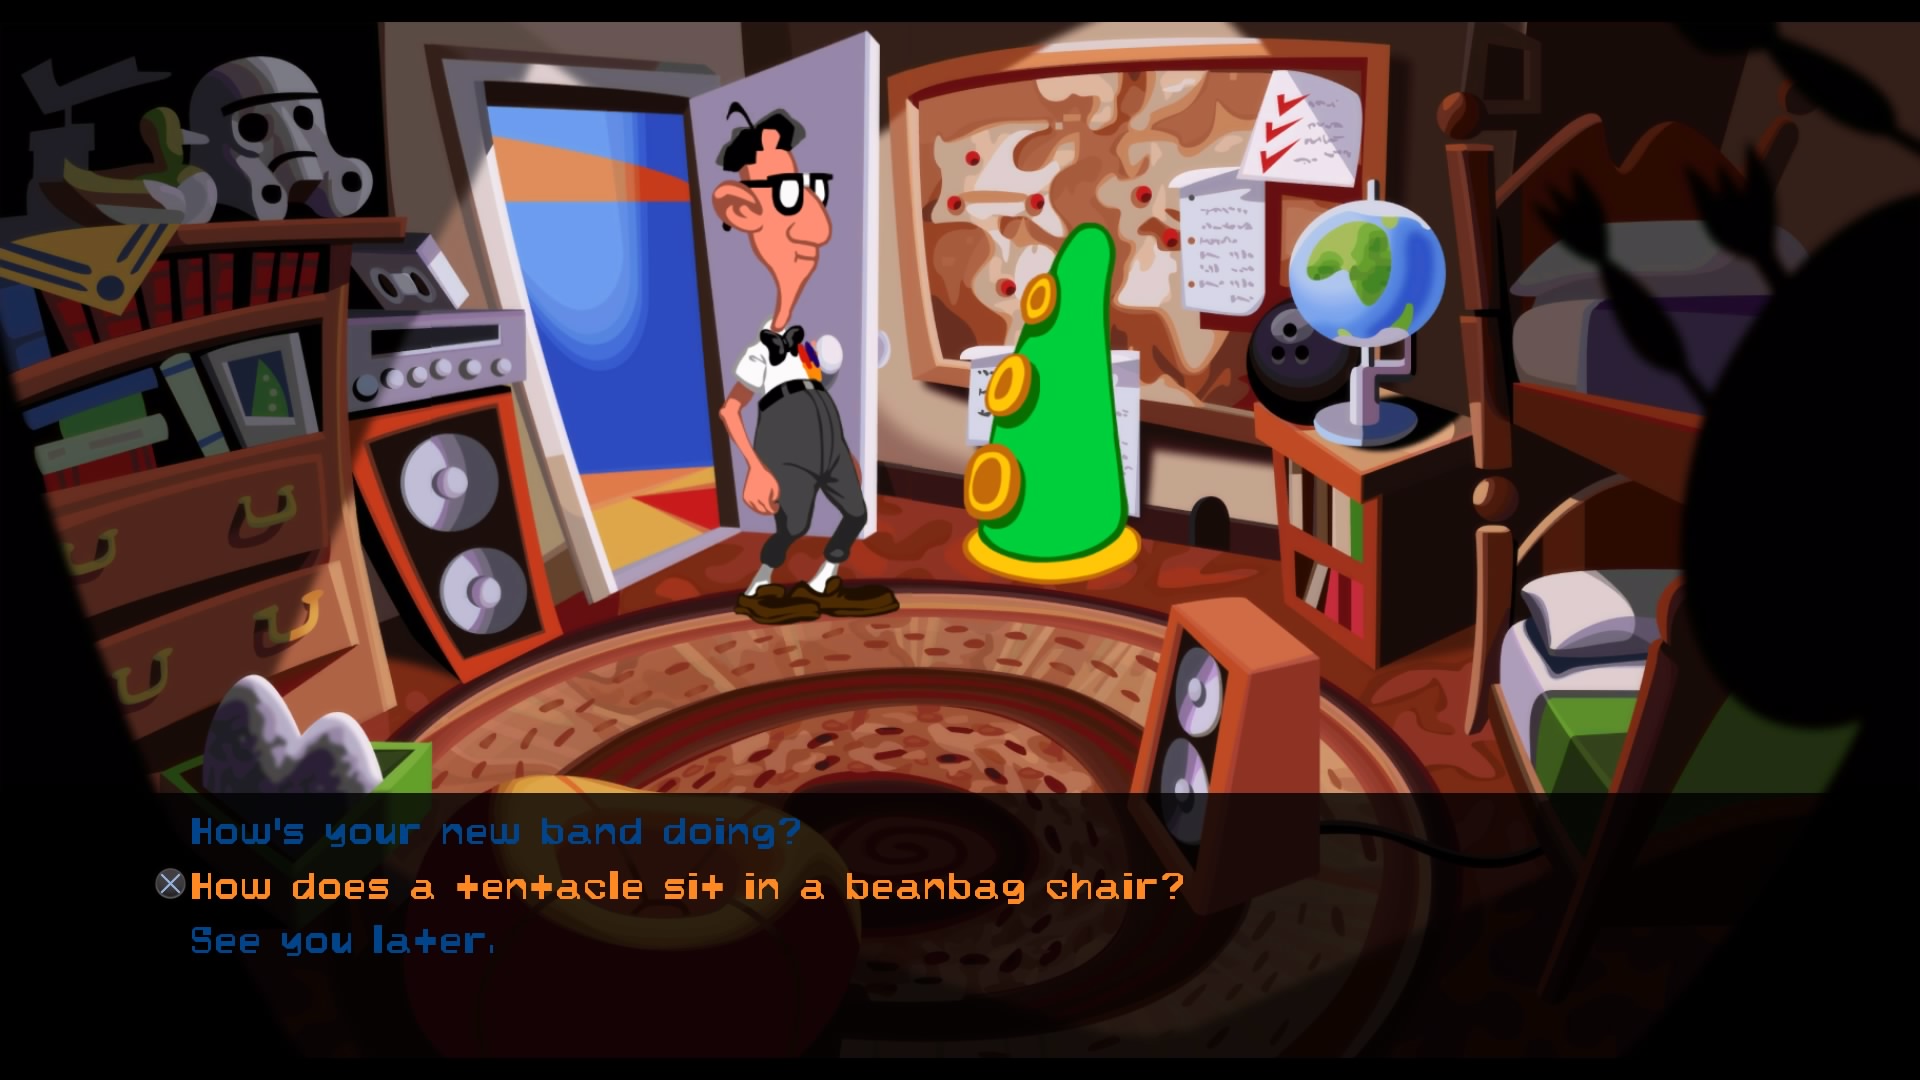 Day Of The Tentacle Backgrounds, Compatible - PC, Mobile, Gadgets| 1920x1080 px